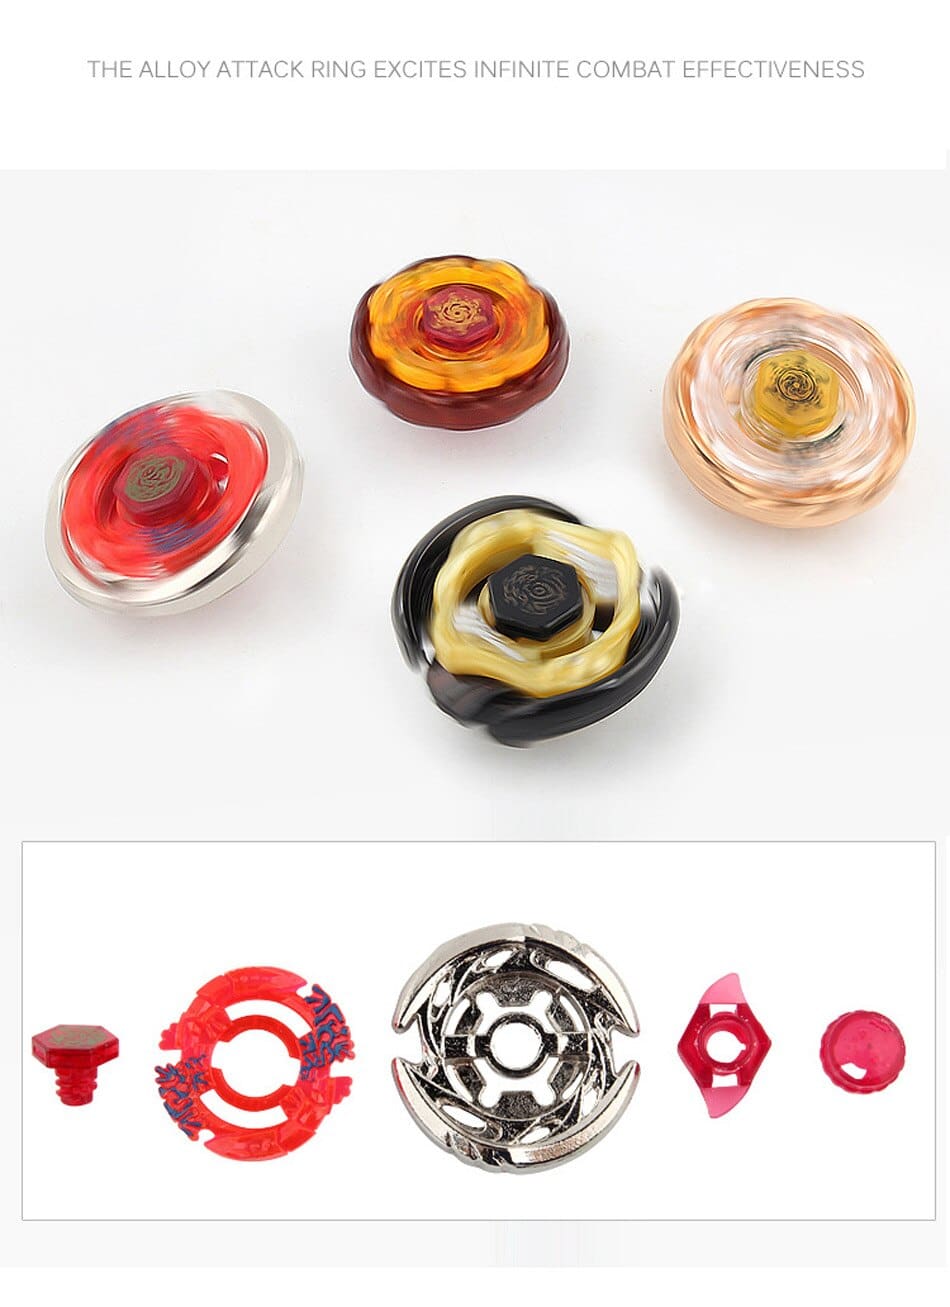 Beyblade Metal Fusion Spinning Tops Toy with Dual Launchers